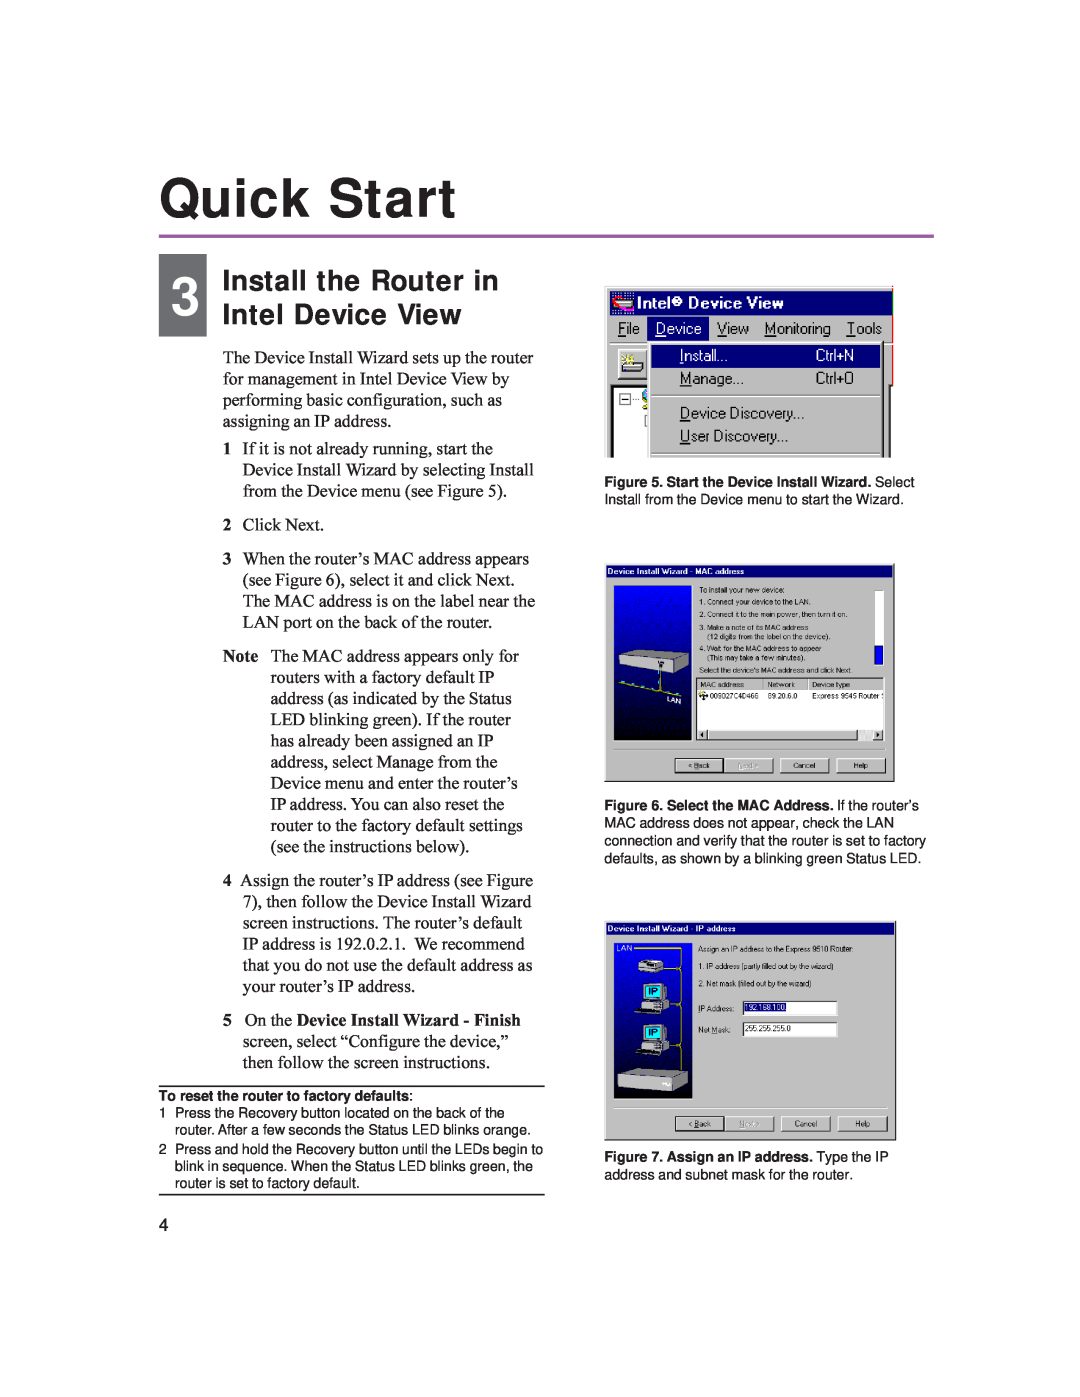 Intel 9545 quick start Quick Start, Install the Router in Intel Device View, 2Click Next 